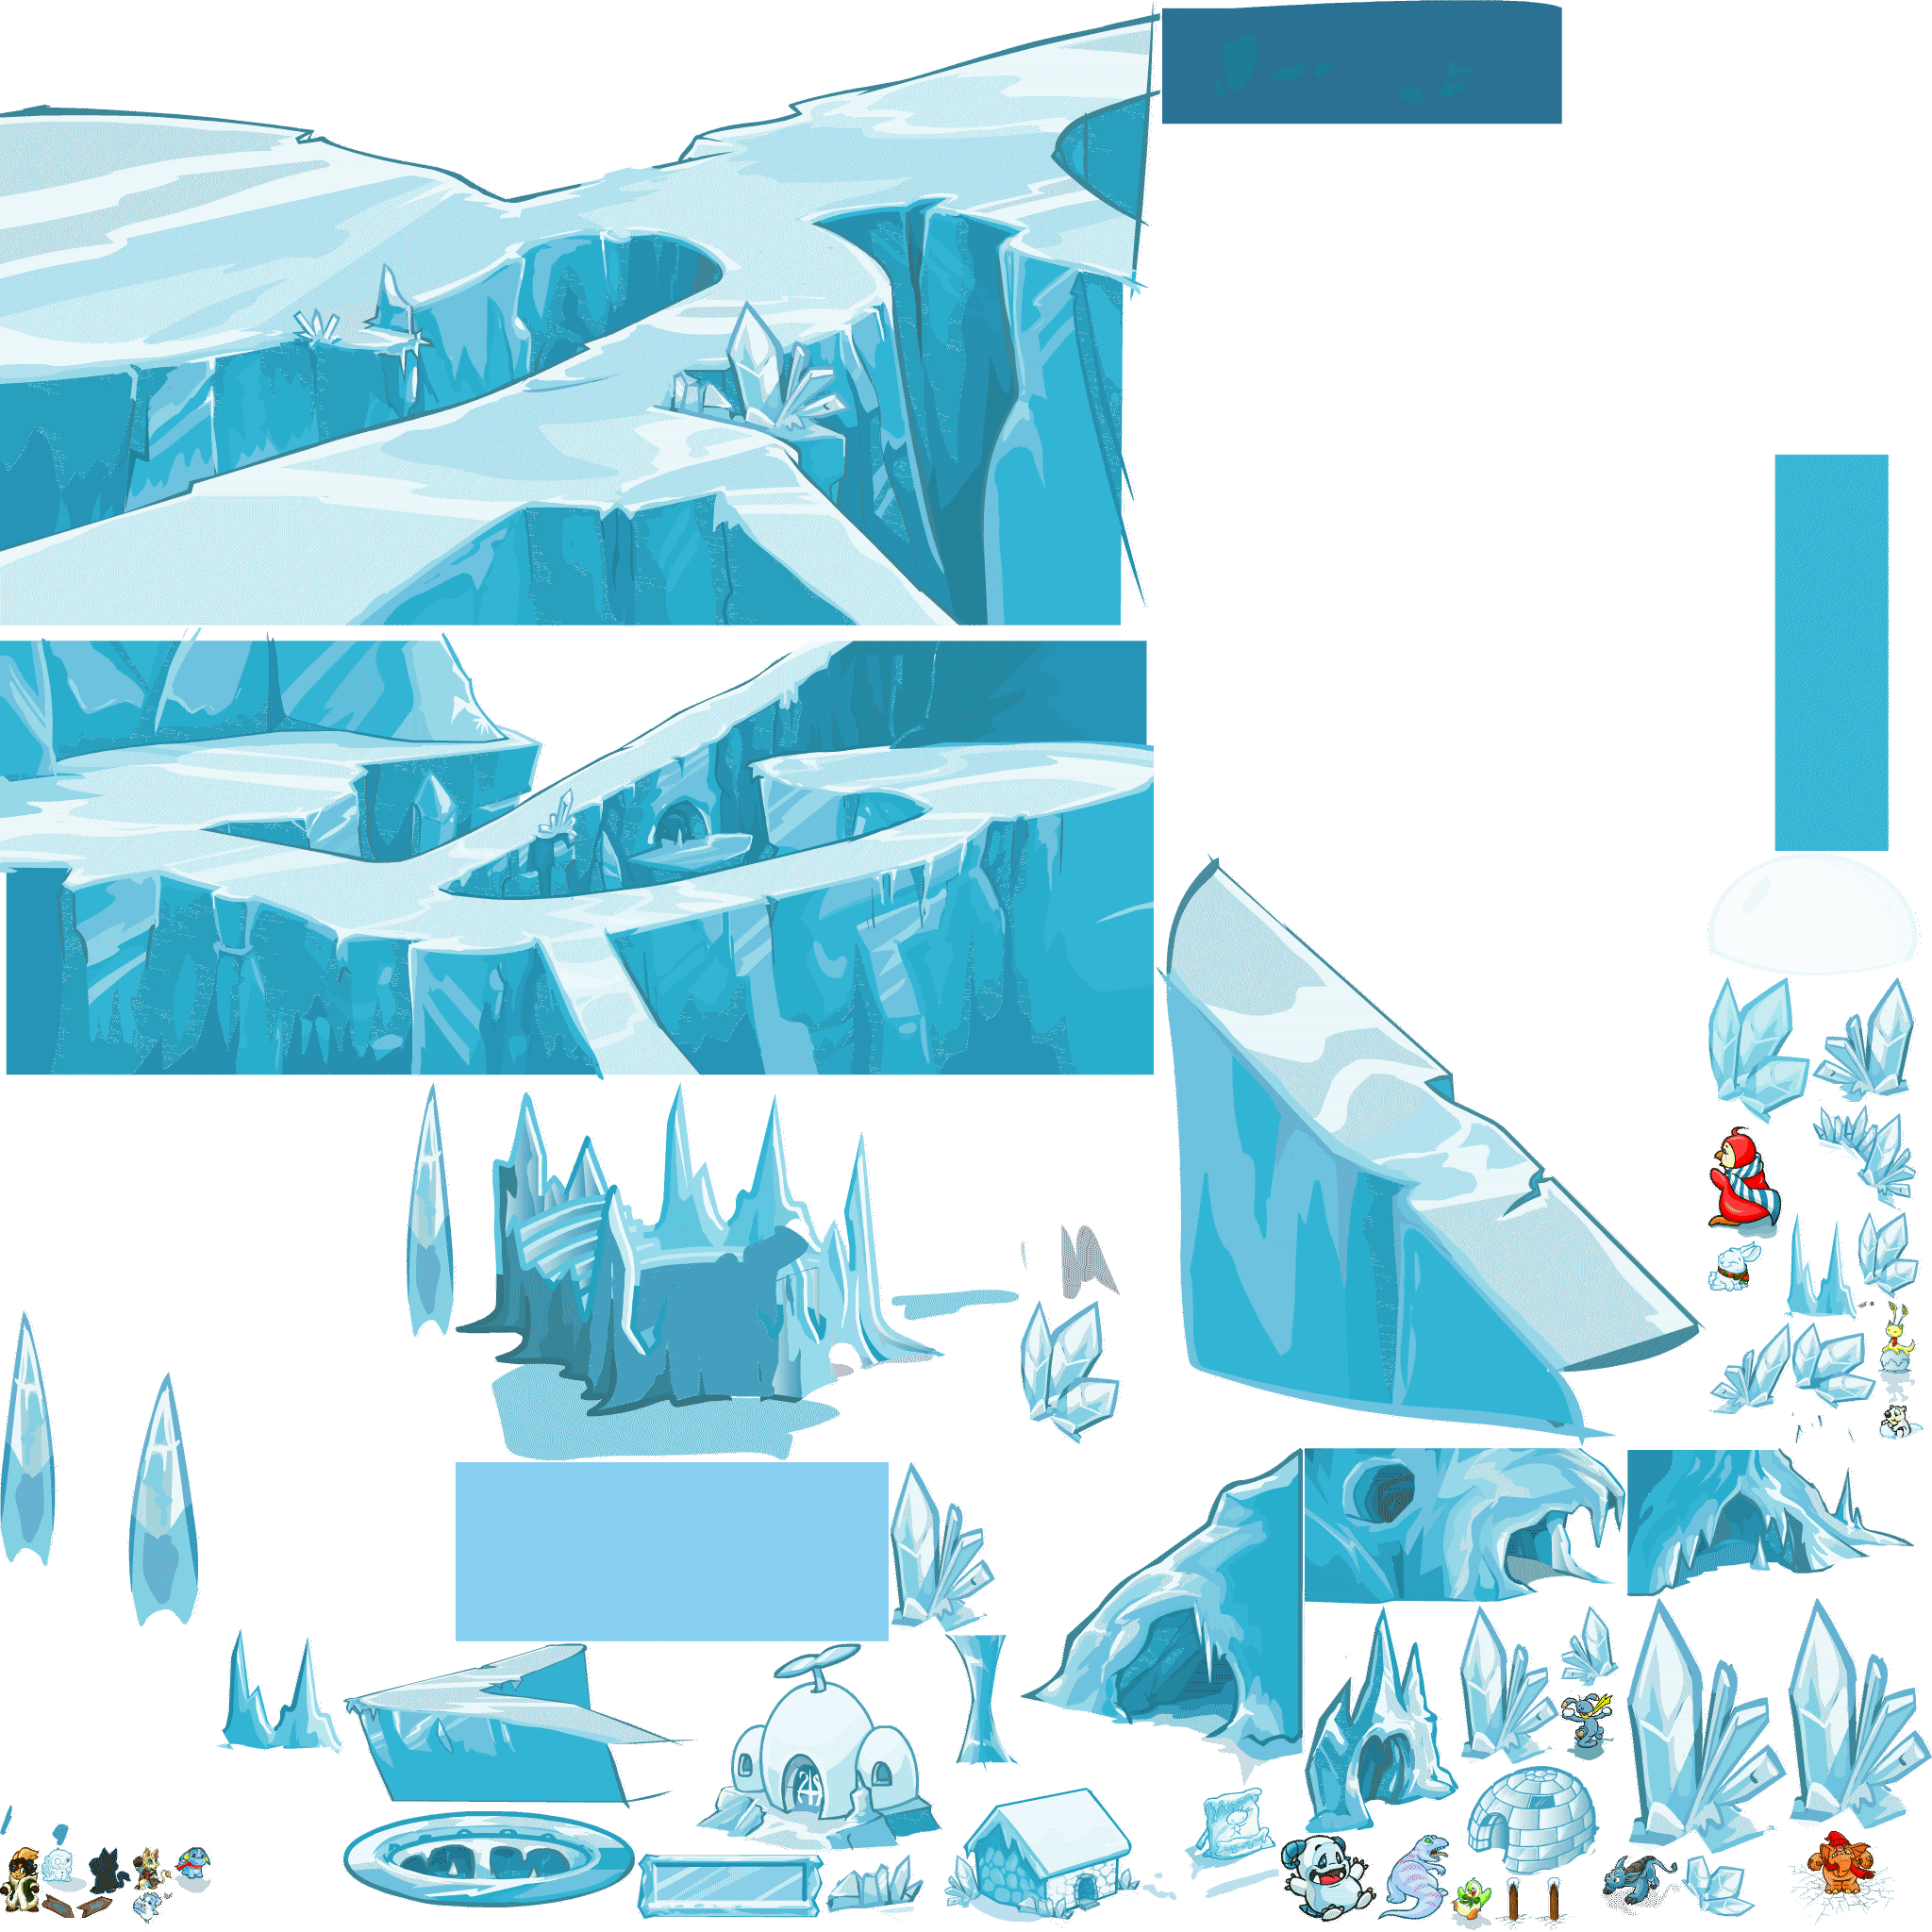 https://images.neopets.com/maps/winter/icecaves/images/atlas_3.png